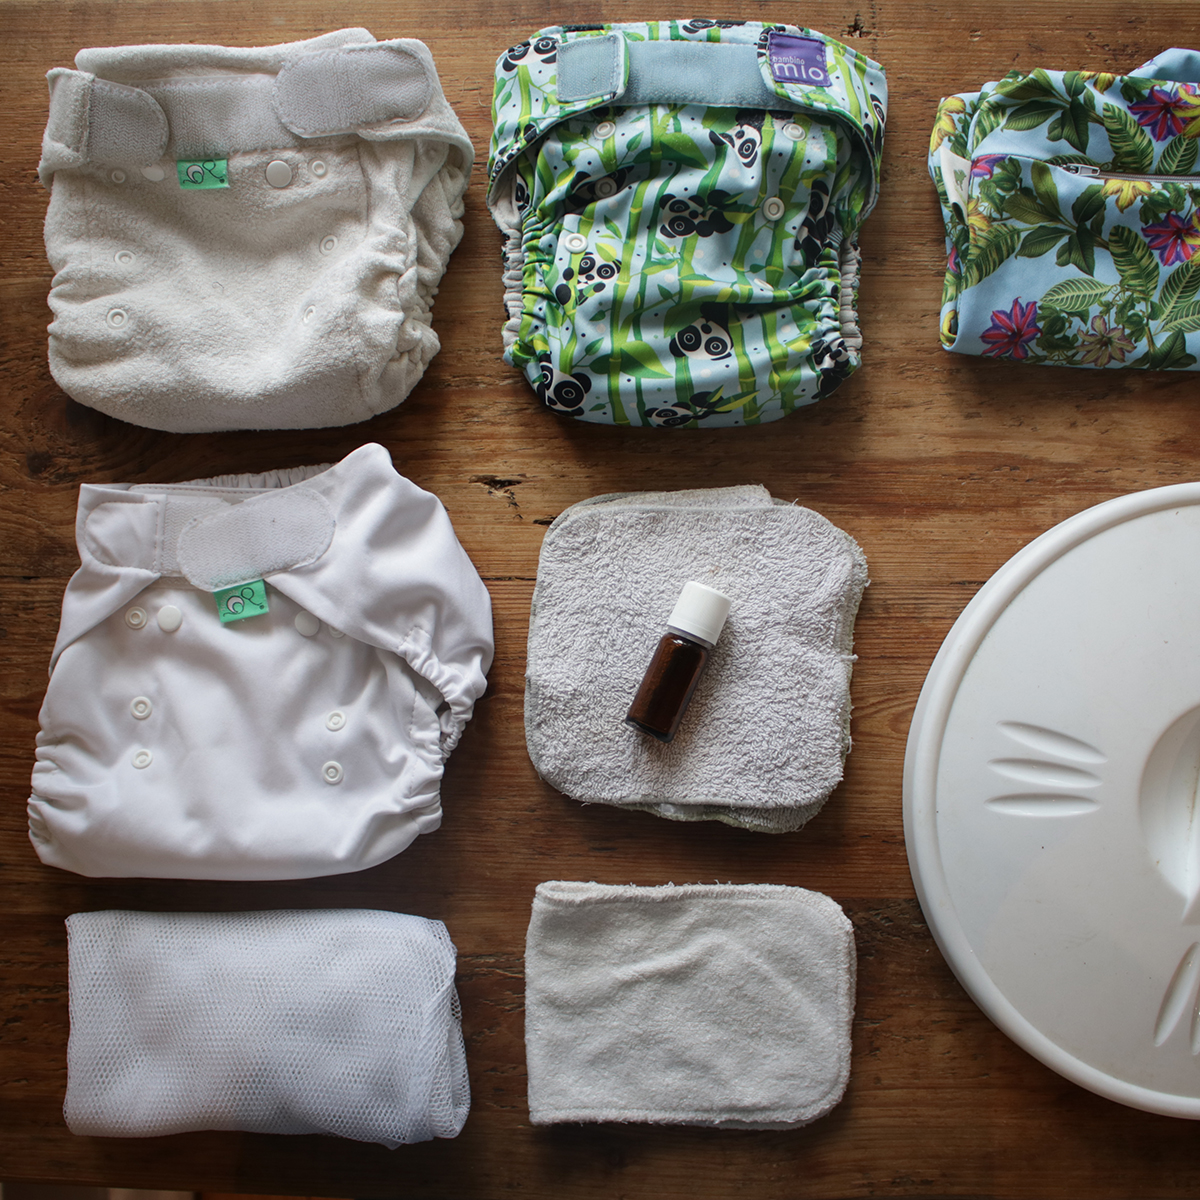 5 Tips to Get Started with Cloth Diapers